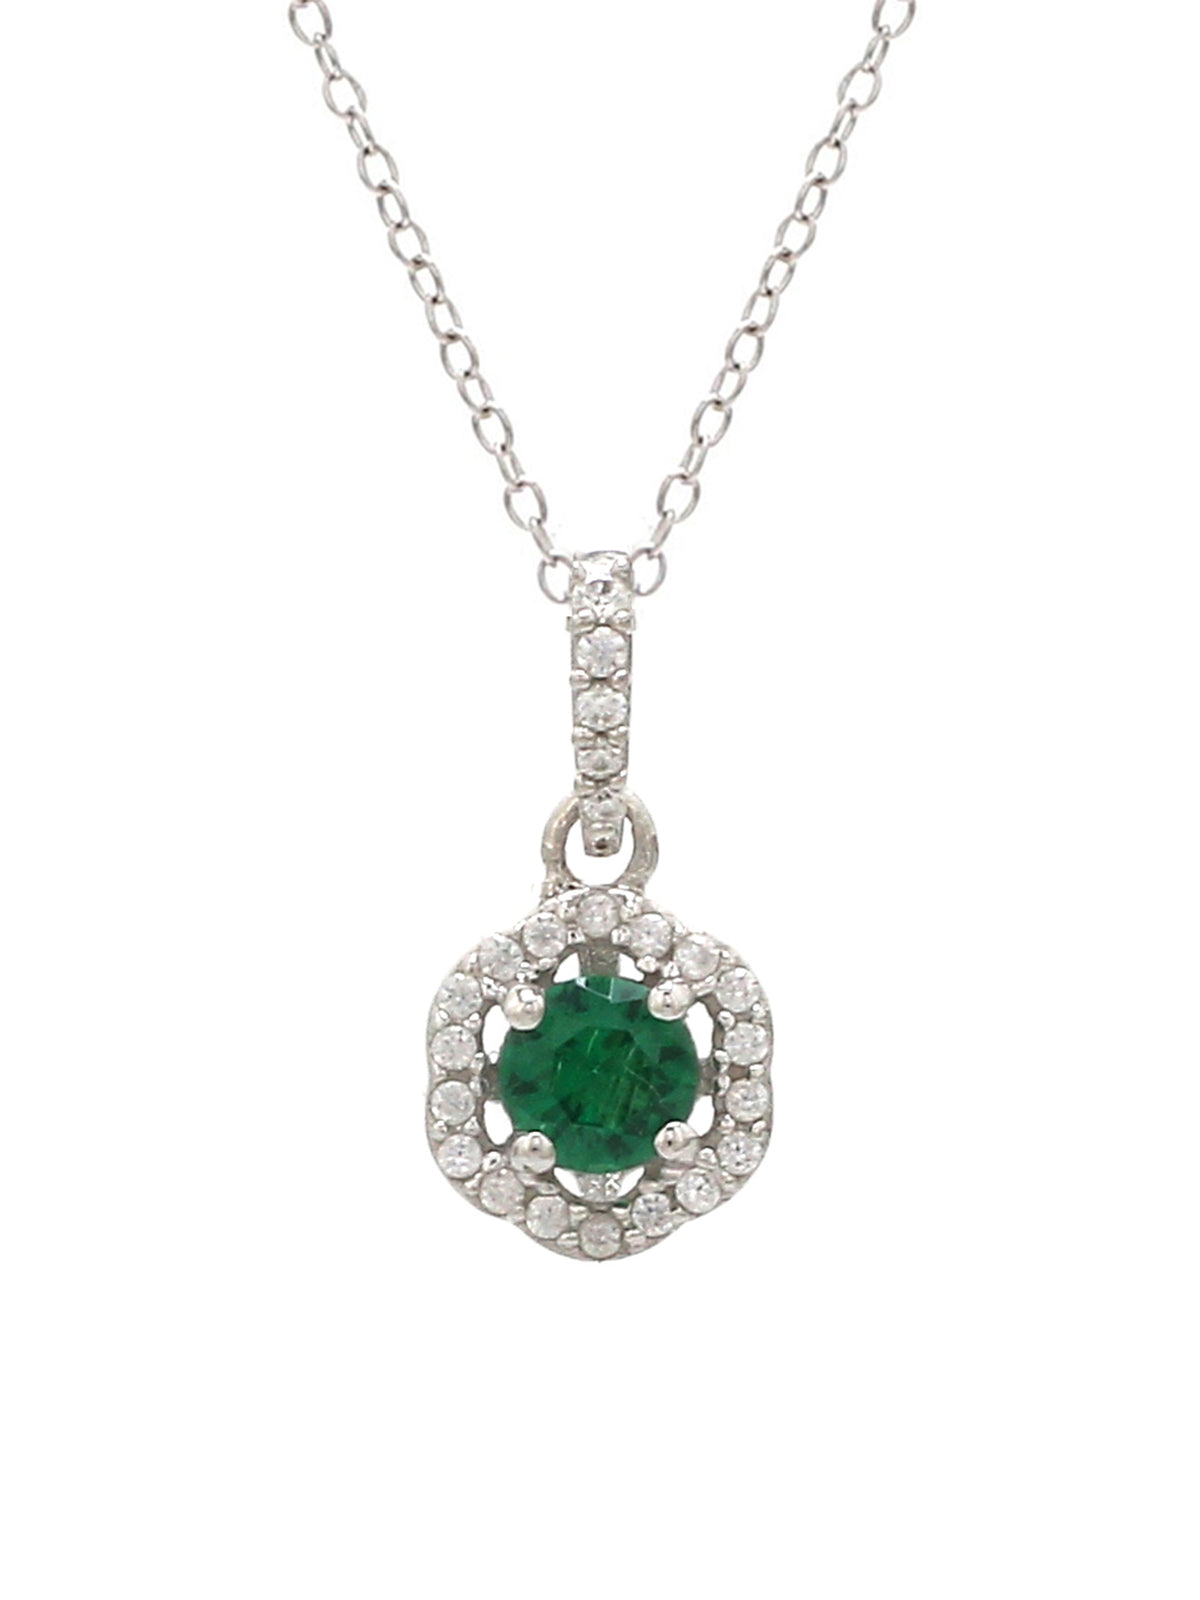 EMERALD SOLITAIRE PENDANT WITH SILVER CHAIN FOR WOMEN